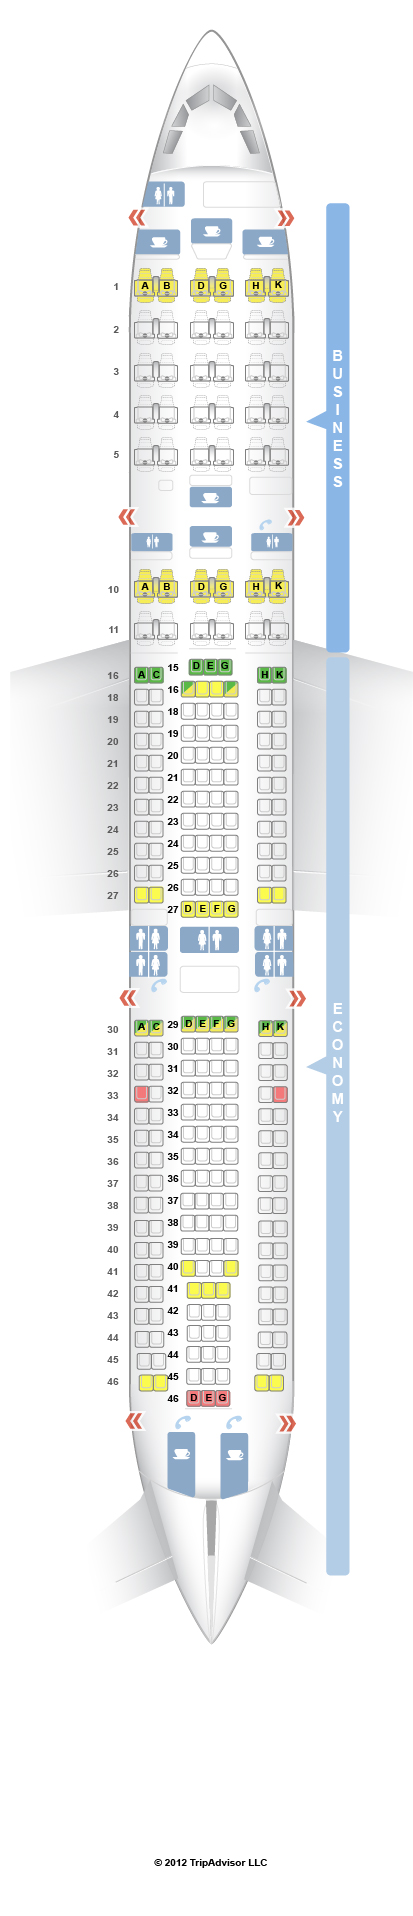 how to get seat assignments on lufthansa